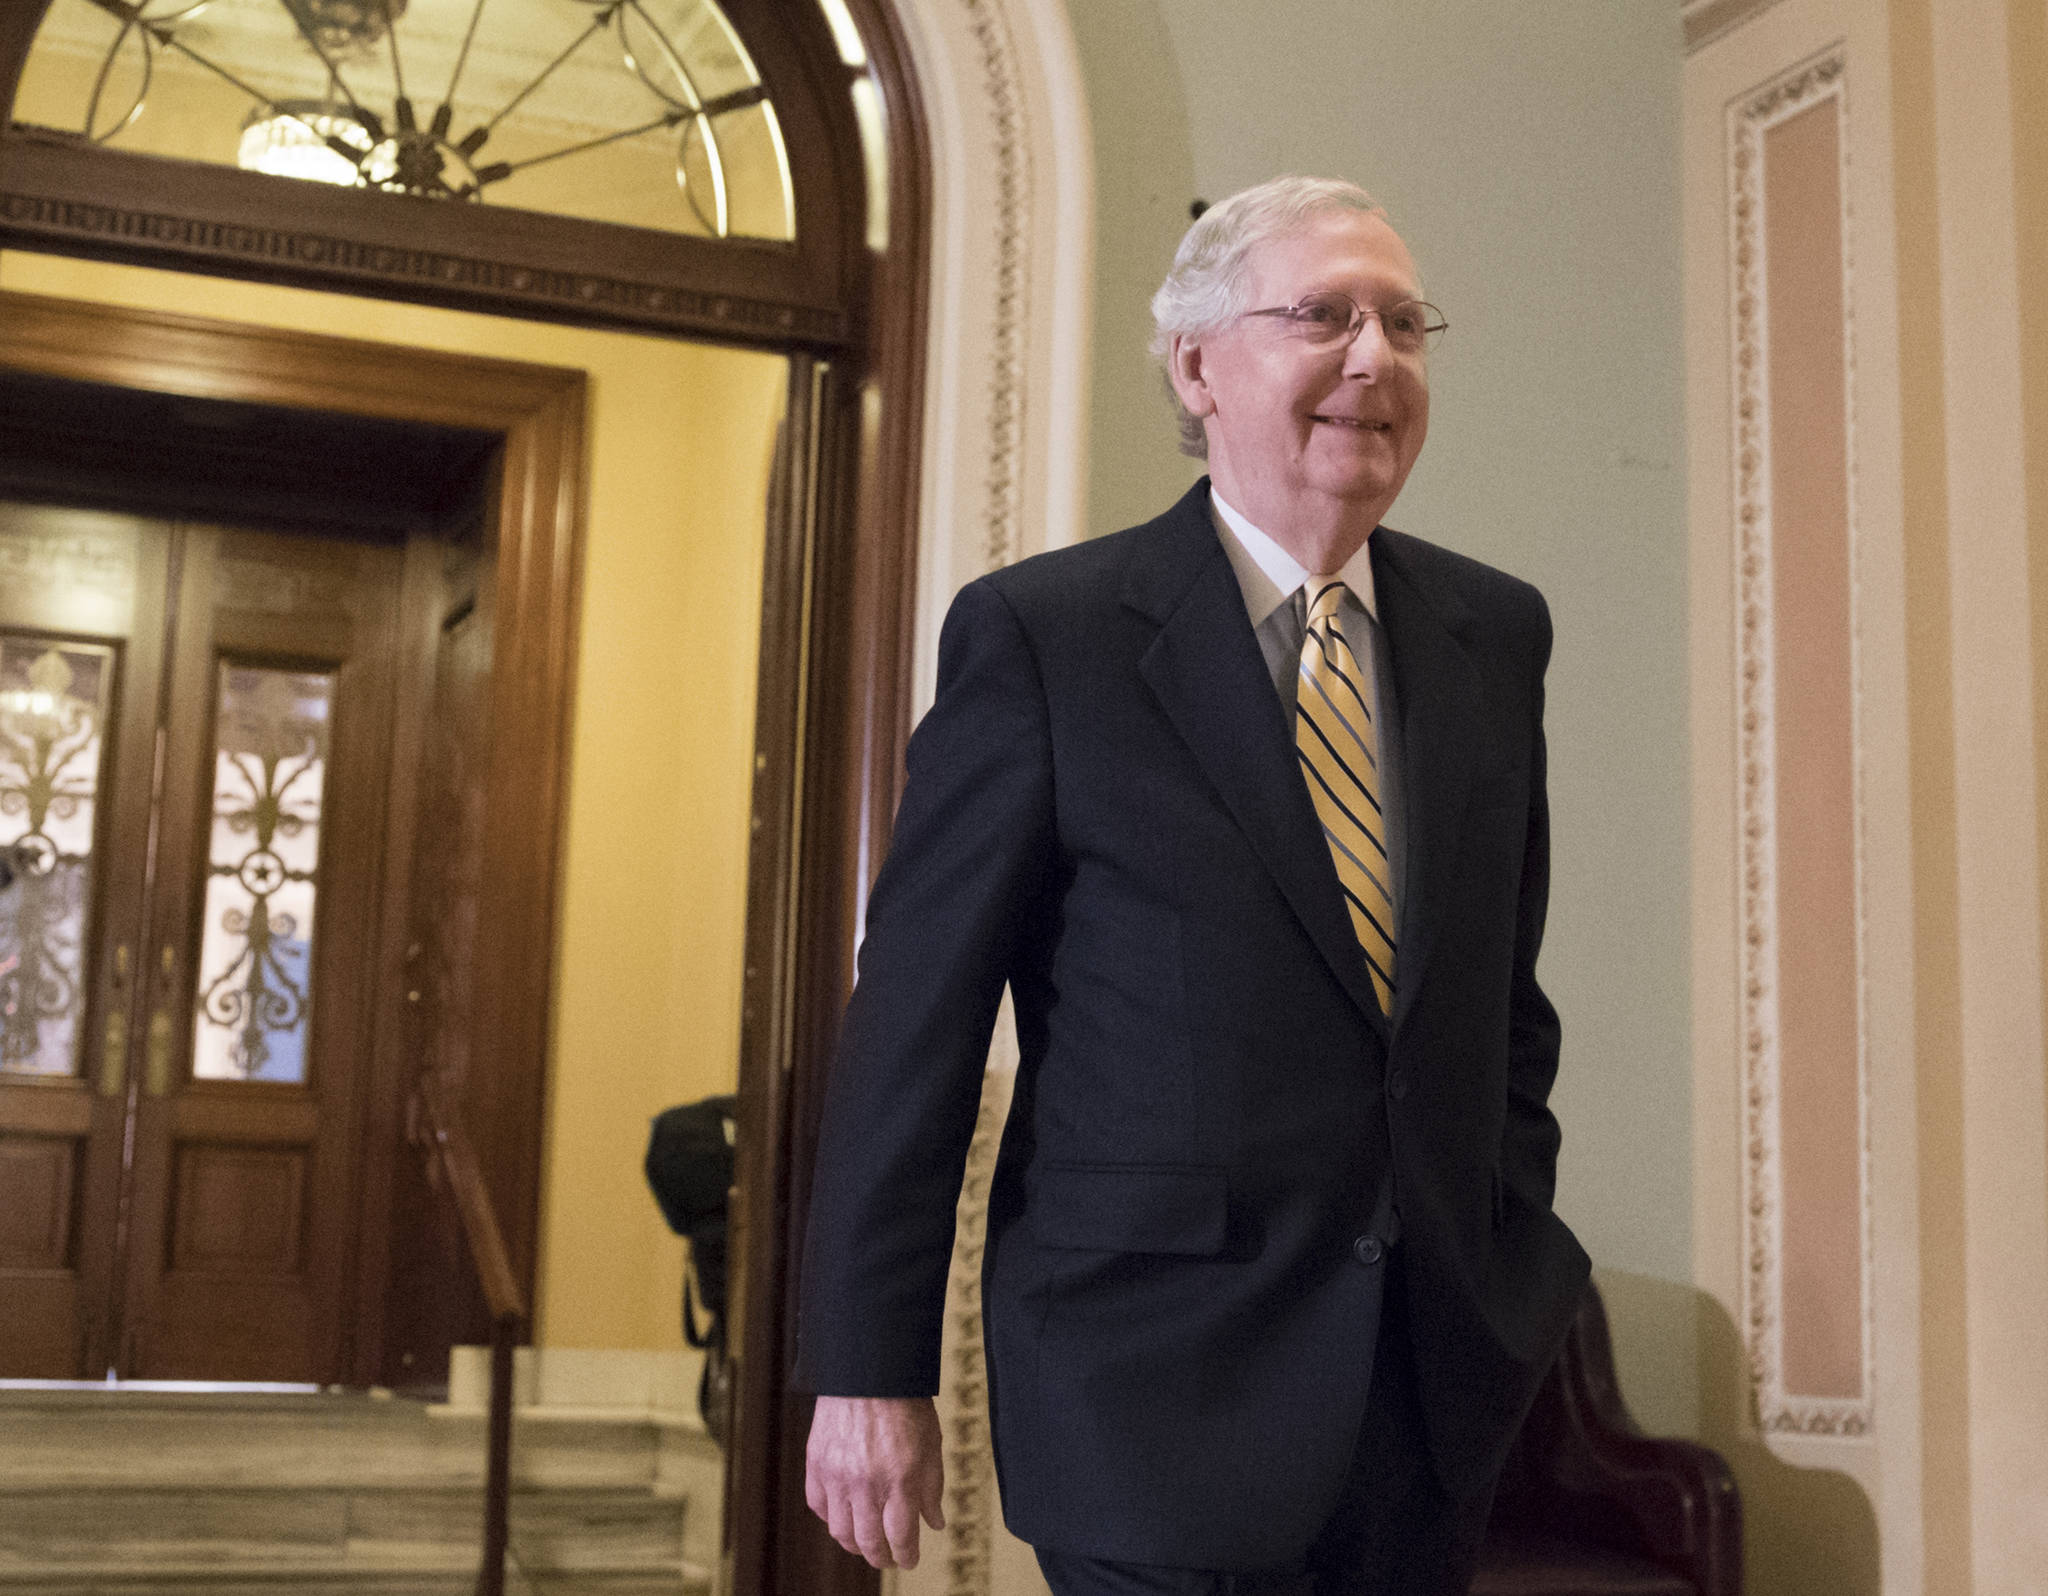 Senate Majority Leader Mitch McConnell, R-Kentucky, walks from the Senate Chamber on Capitol Hill in Washington, D.C. on Tuesday, July 25, 2017, as he steers the Senate toward a crucial vote on the Republican health care bill. (J. Scott Applewhite | The Associated Press)